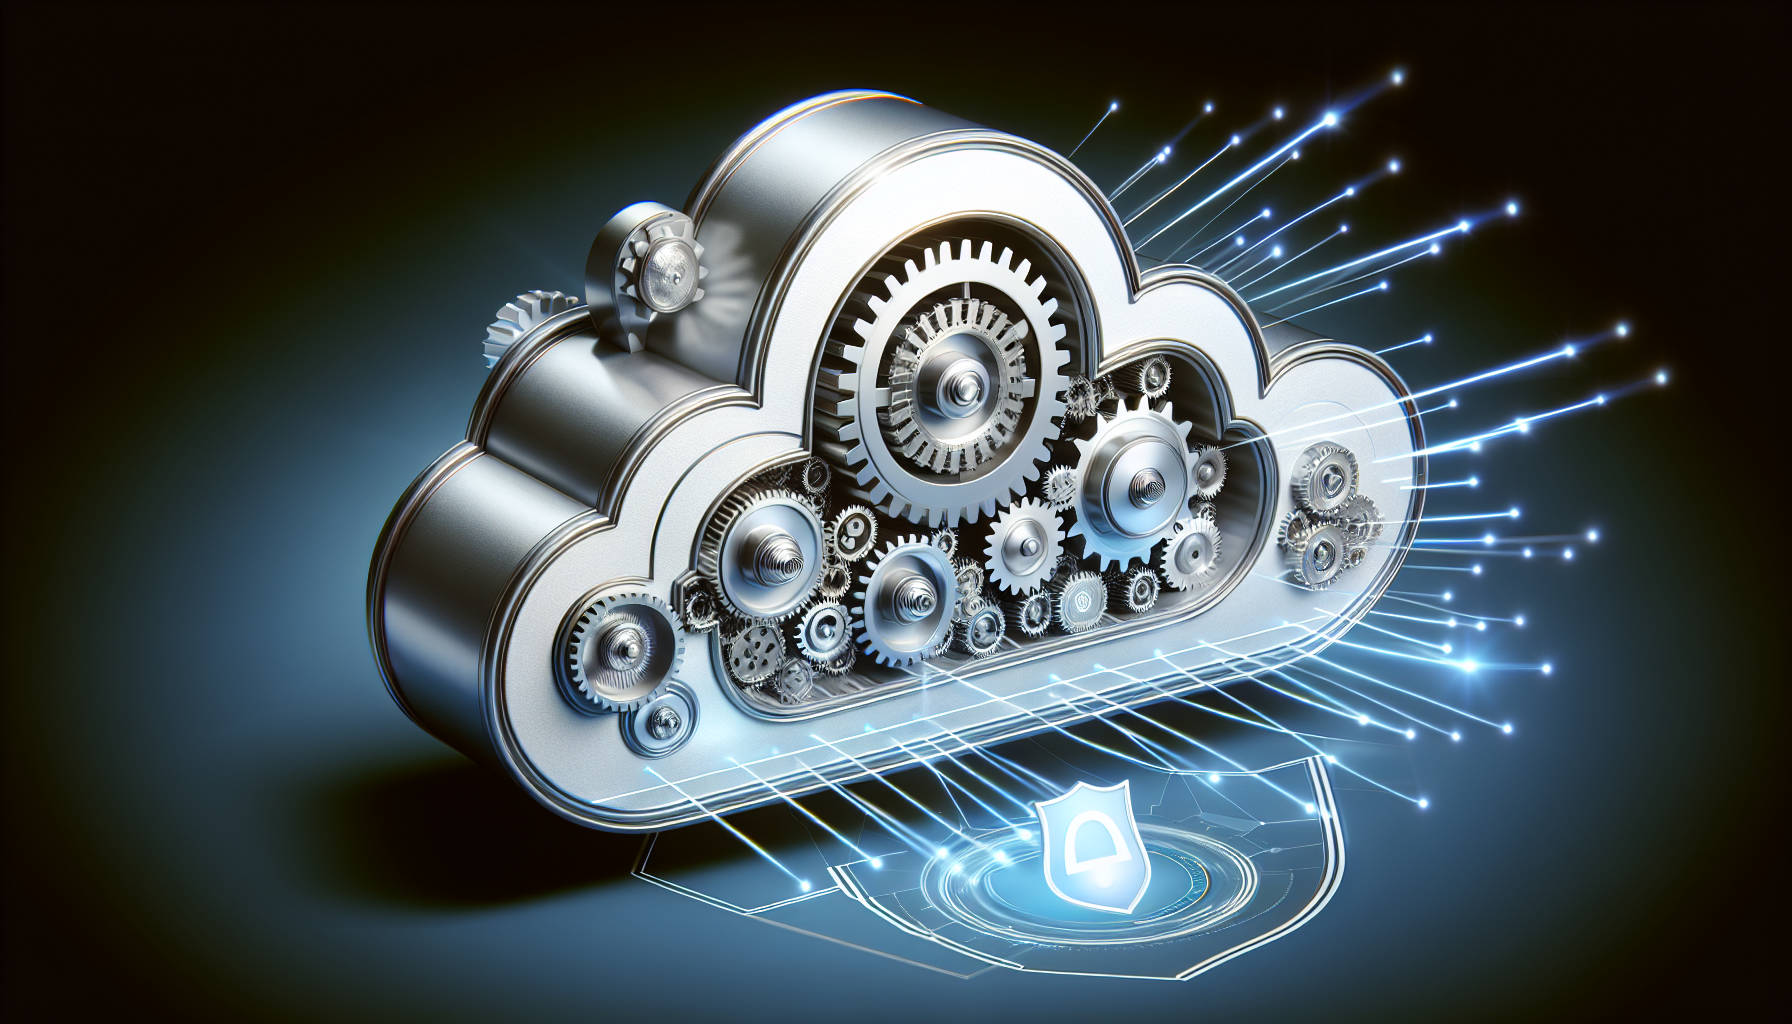 Efficient cloud bookkeeping system with advanced technology and security features